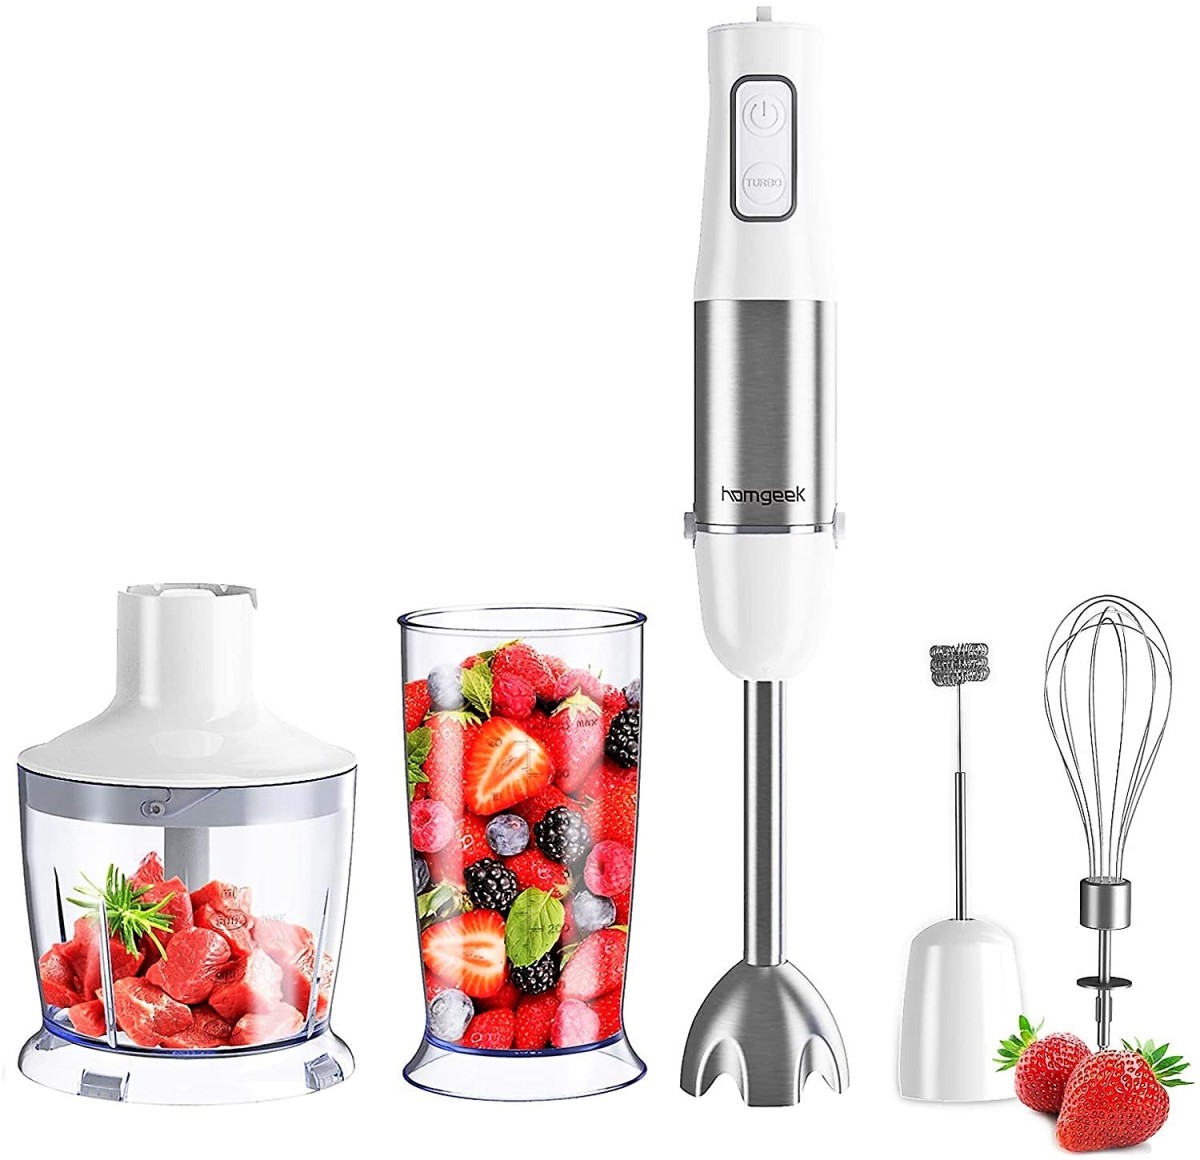 Homgeek 5-in-1 Hand Blender with food chopper (left) - beaker (2nd) - mixer (3rd) - frother (4th) - whisk (right) 